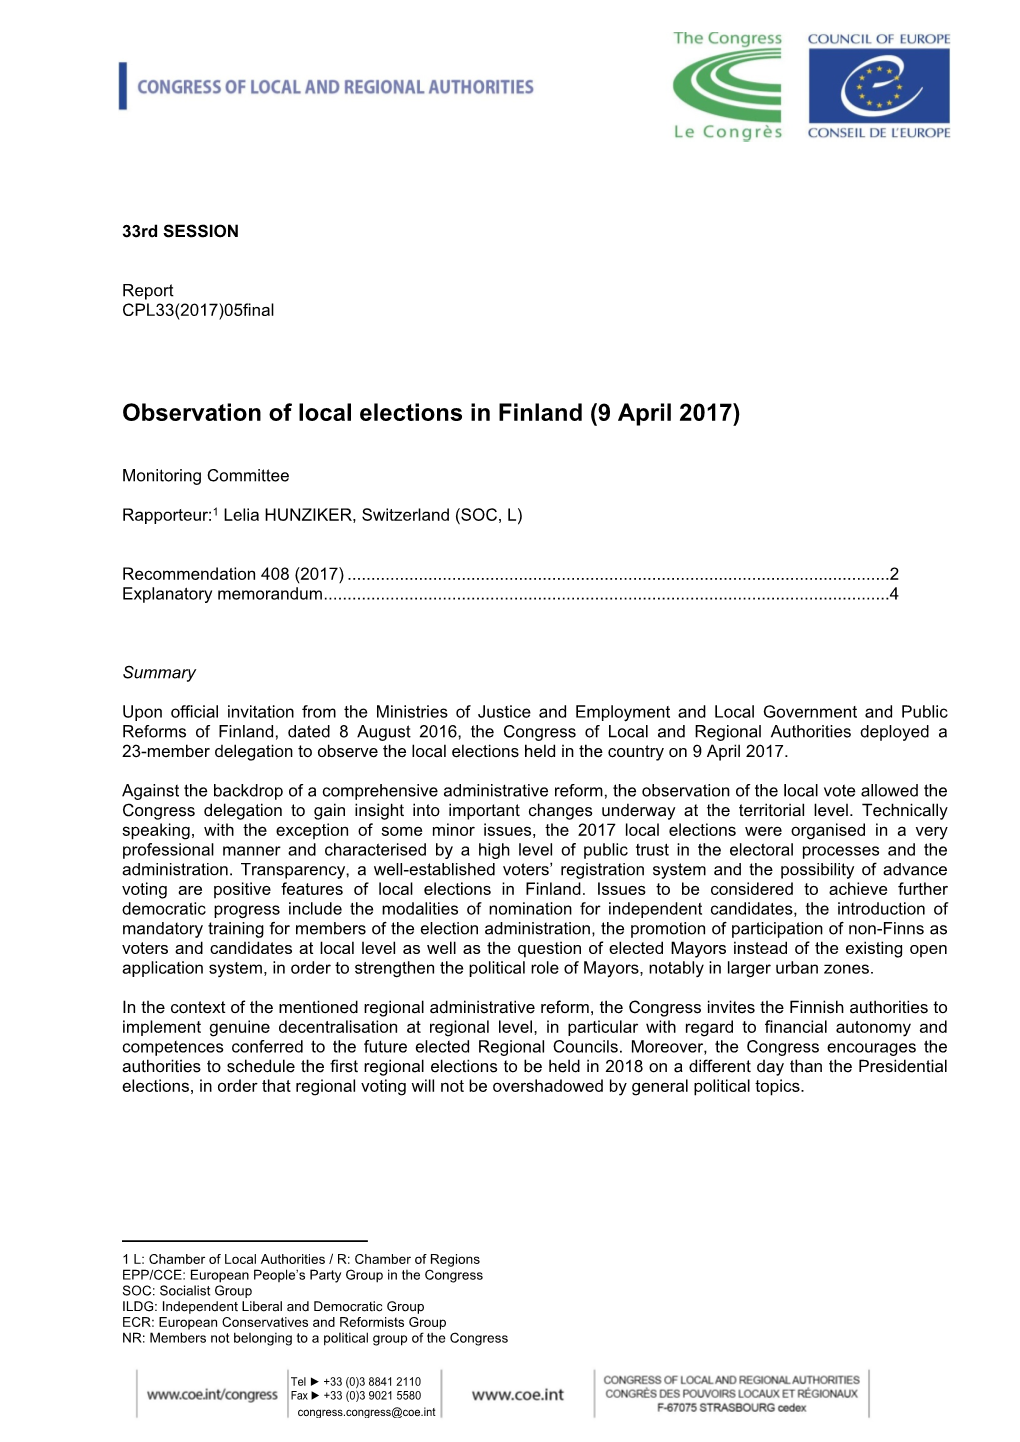 Observation of Local Elections in Finland (9 April 2017)